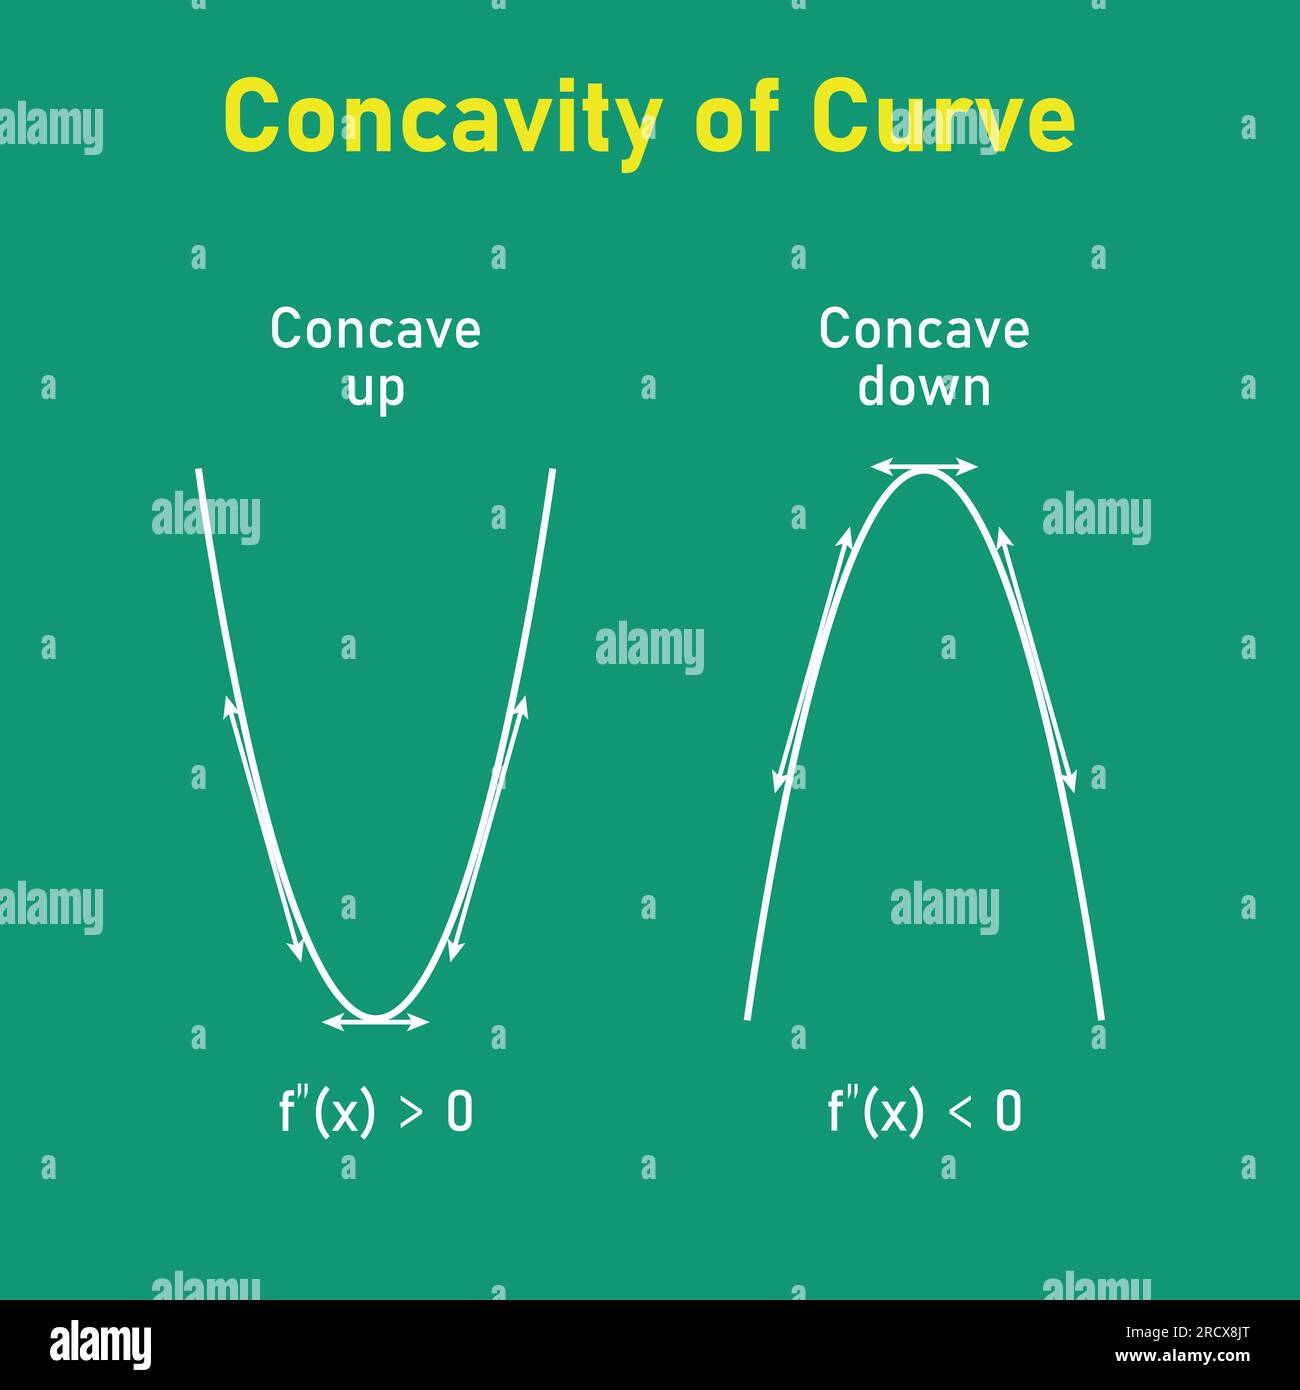 Concavity of curve. Concave down and concave up. Second derivative tangent lines of function. Mathematics resources for teachers and students. Stock Vector